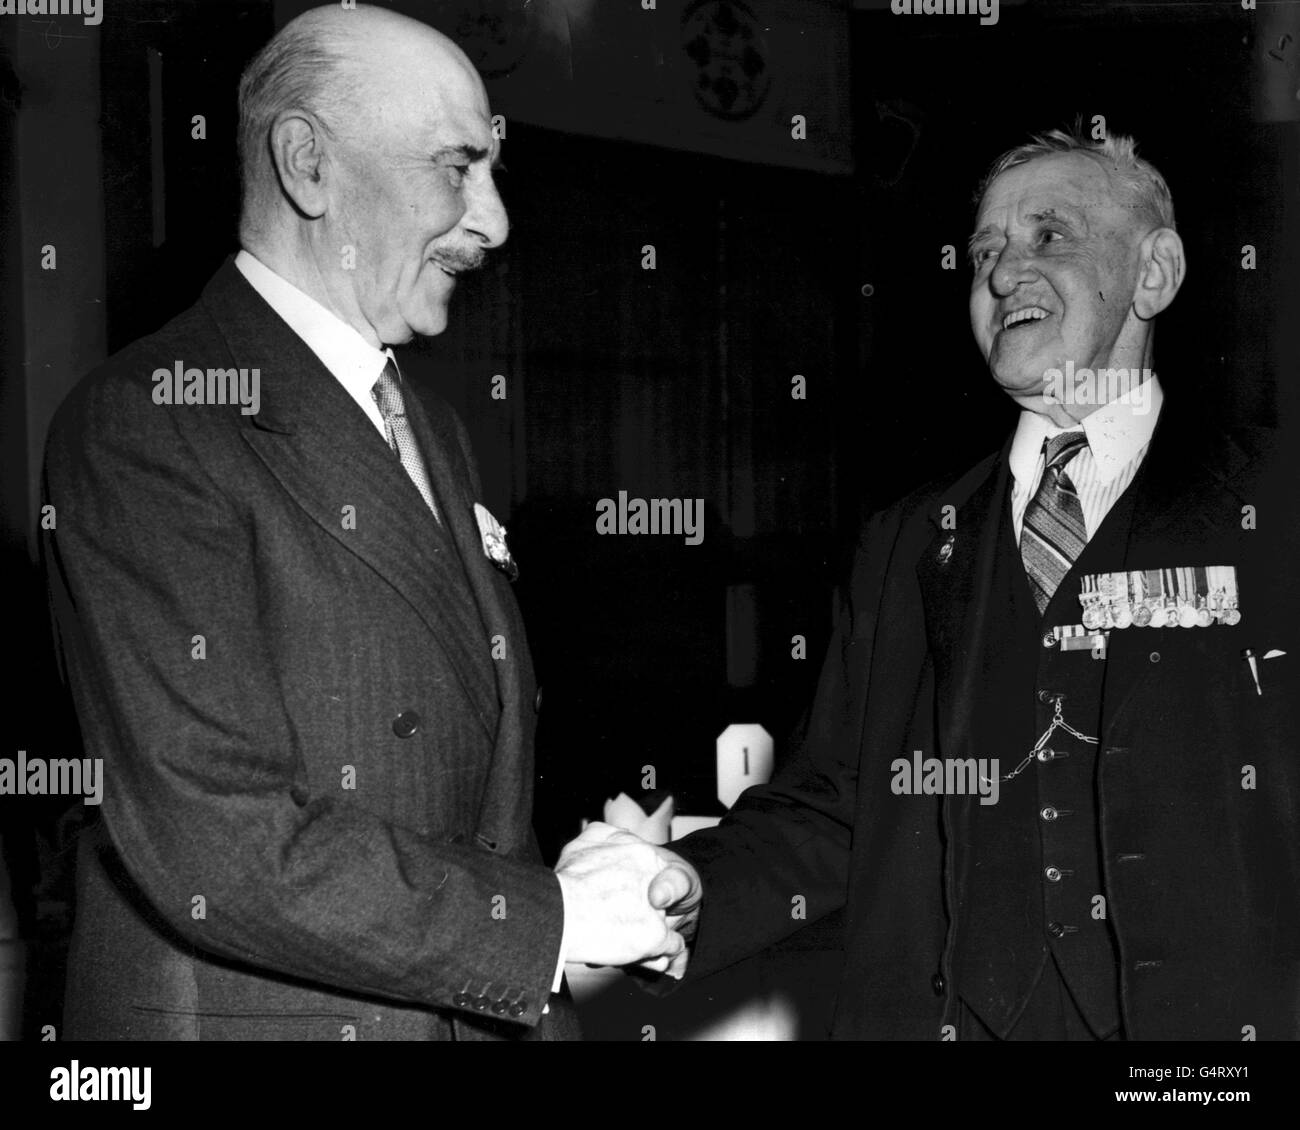 Boer War veterans: Survivors of the historic relief of Mafeking met at a reunion luncheon at the Royal Empire Society, Northumberland Avenue, London, on the 50th anniversary of the relief. Major-General the Earl of Athlone, who took part in the relief of the town, presided. Picture shows the Earl of Athlone (l) greeting his batman, Private Charles Mott (82) of Maidstone, Kent, at the luncheon. Stock Photo